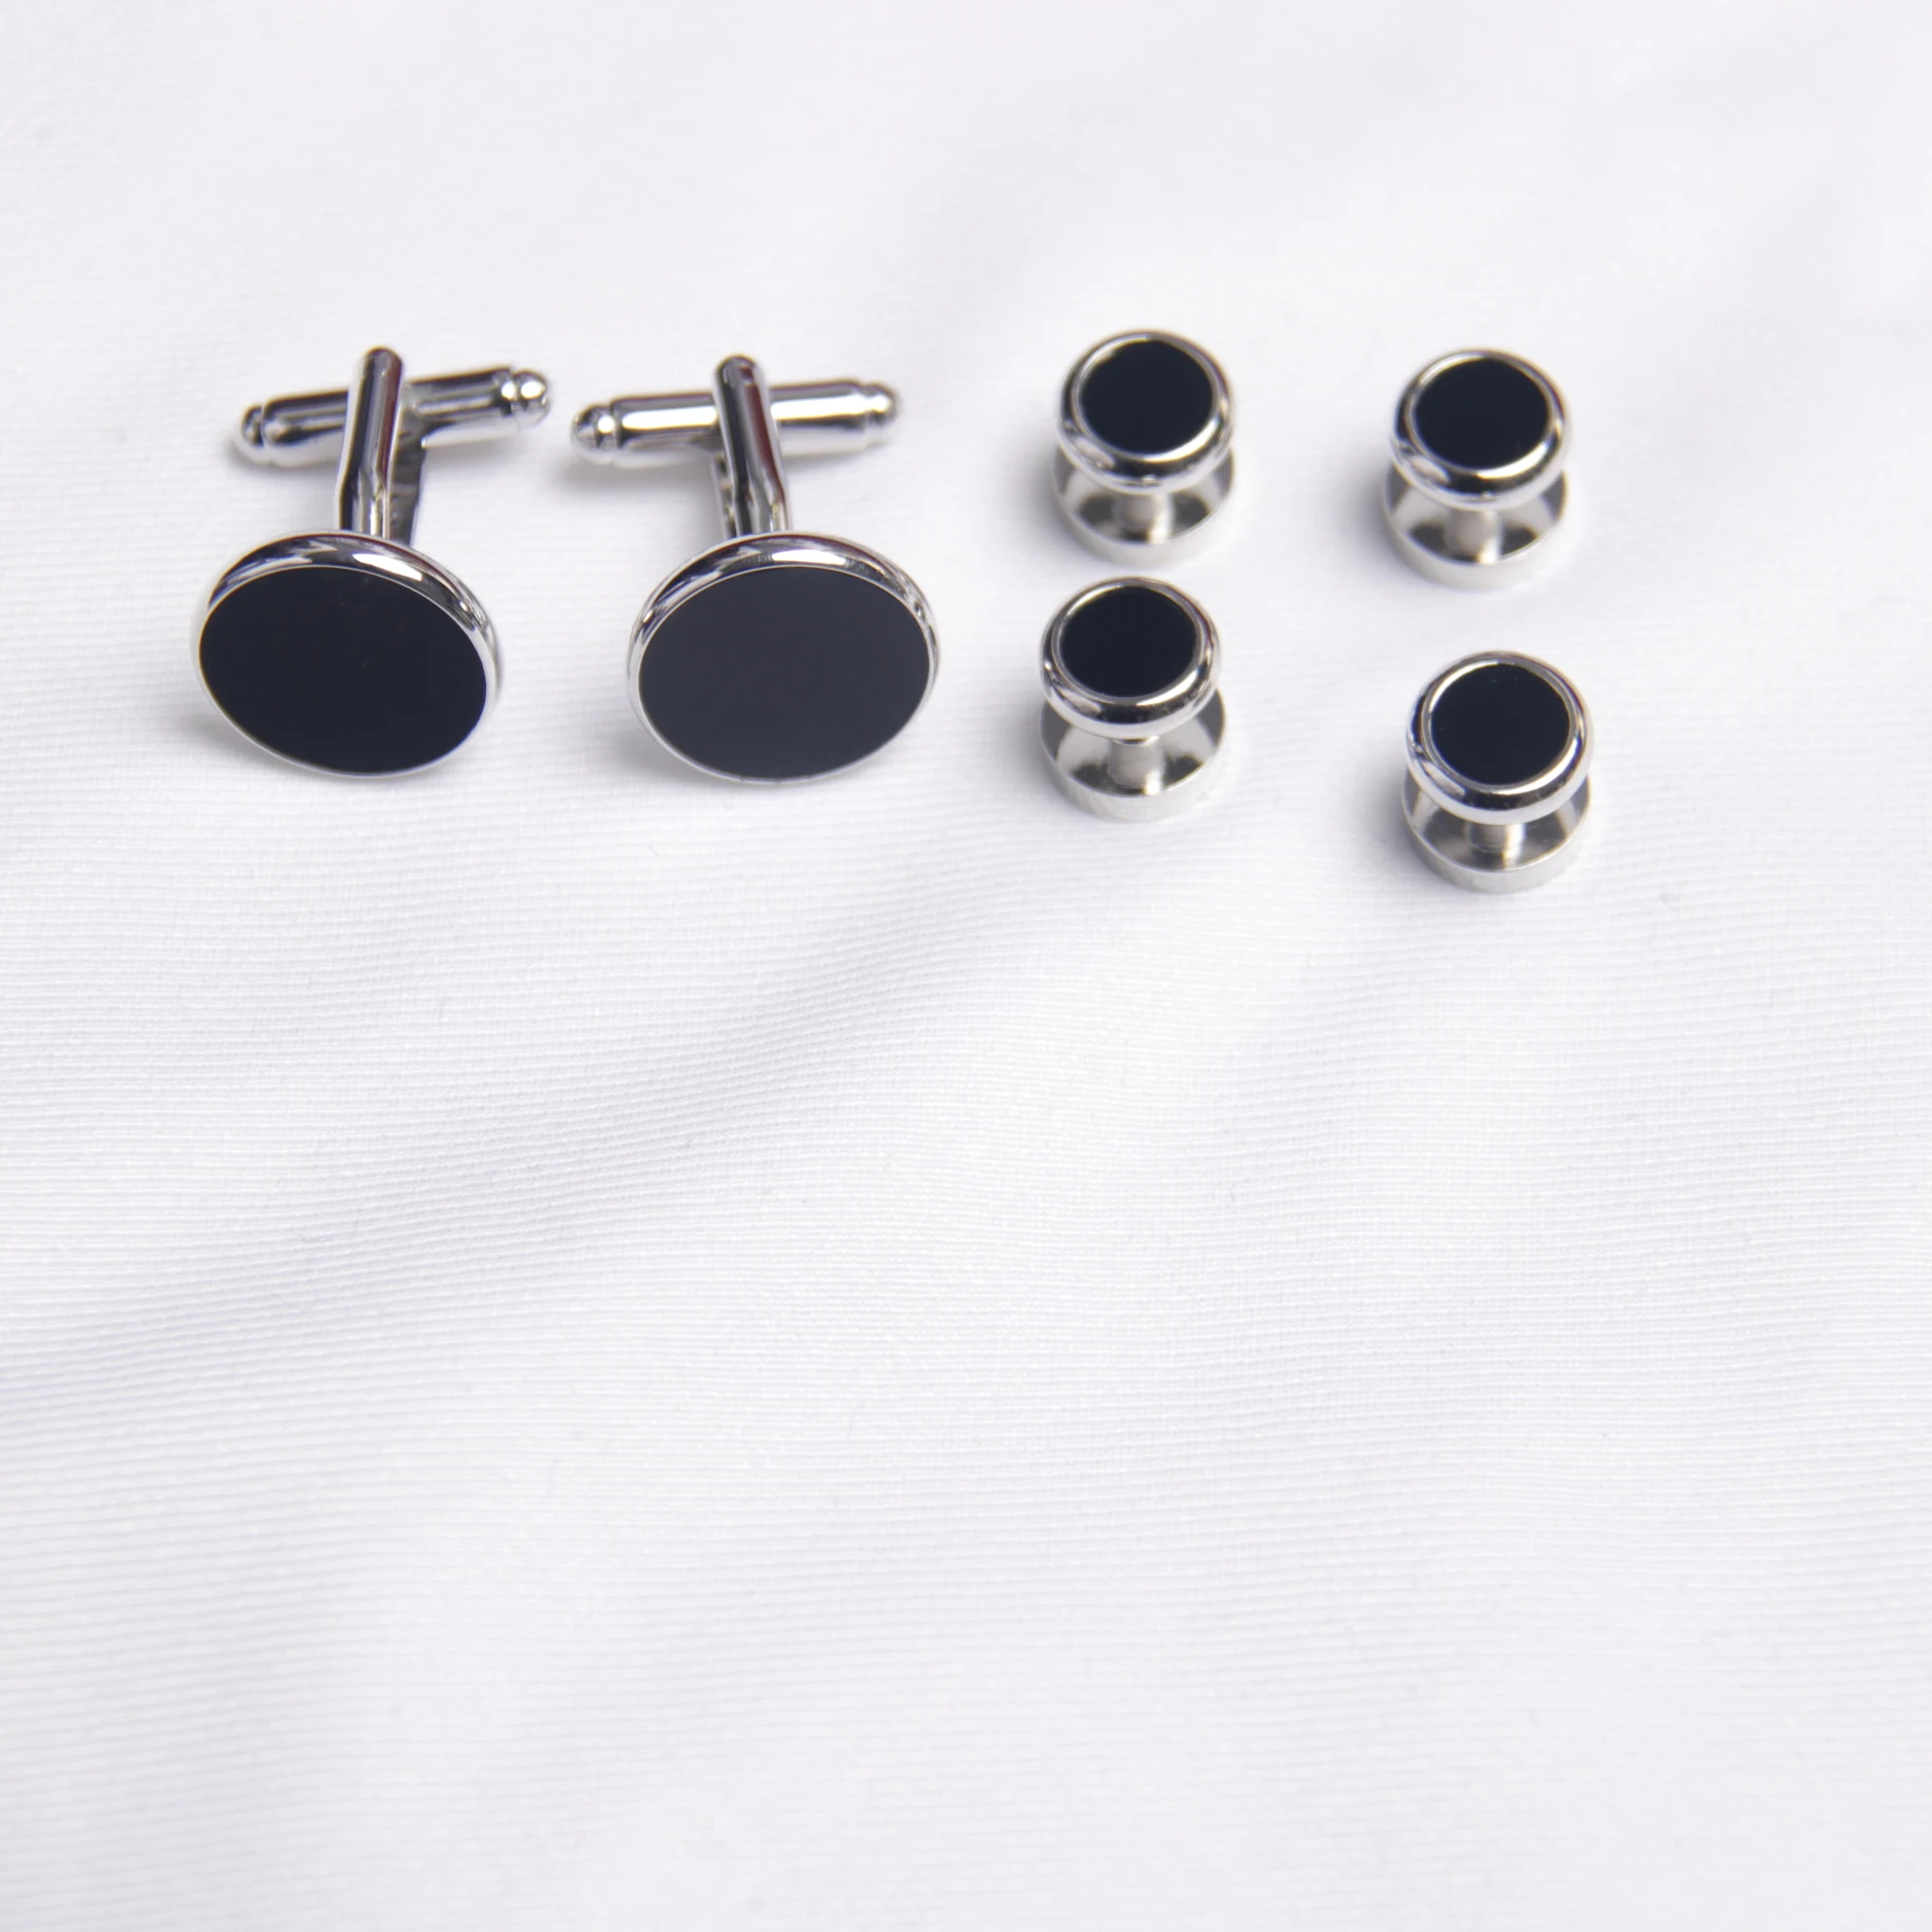 Studs And Cufflinks For Dress Shirts High Quality Accessories Black Silver Metal Studs For Tuxedo Shirts Wedding Shirts Fashion